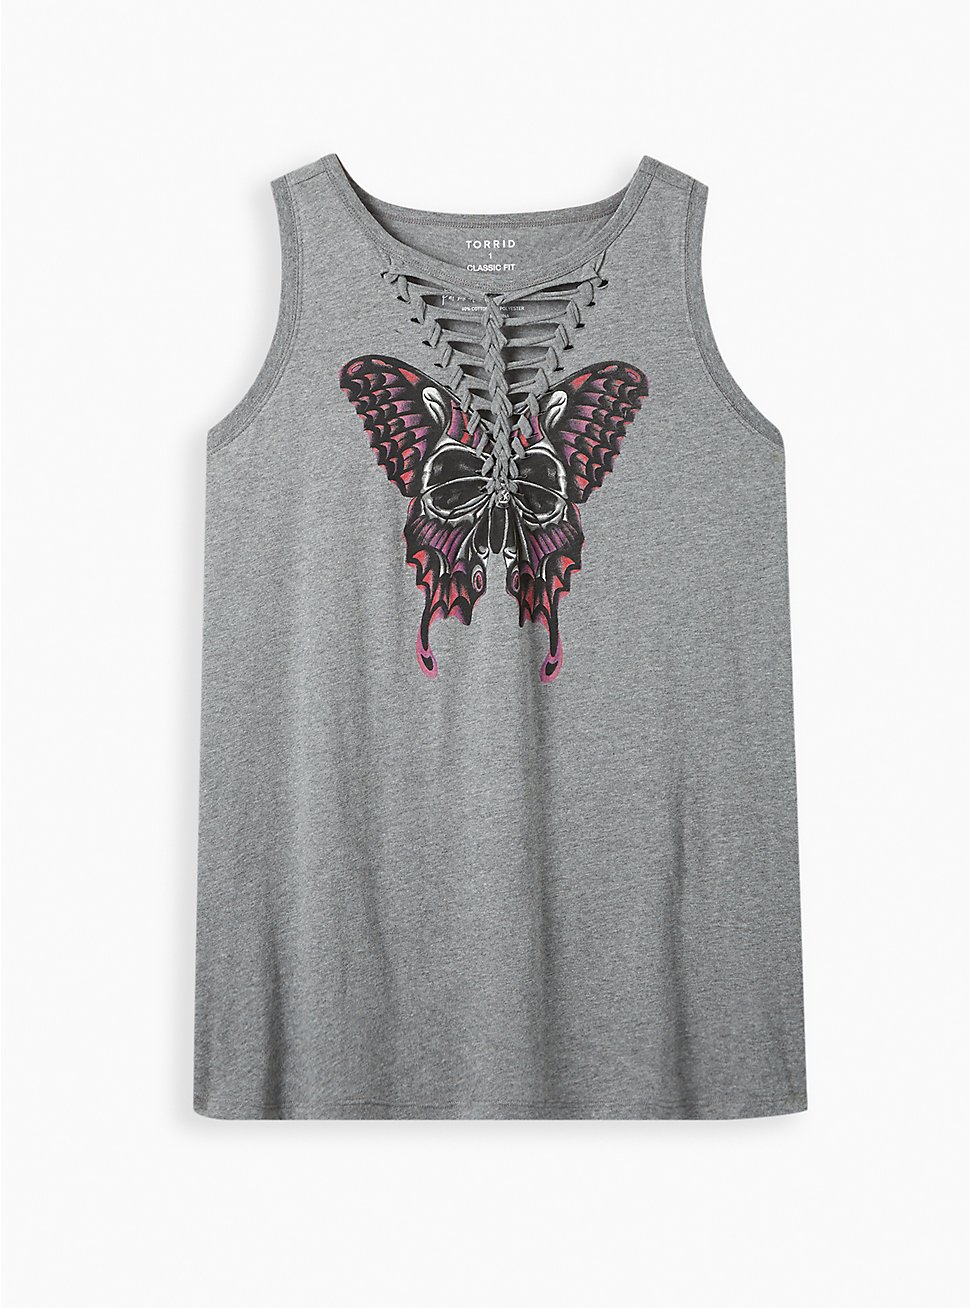 Graphic Classic Fit Super Soft V-Neck Lattice Tank, BUTTERFLY GREY, hi-res